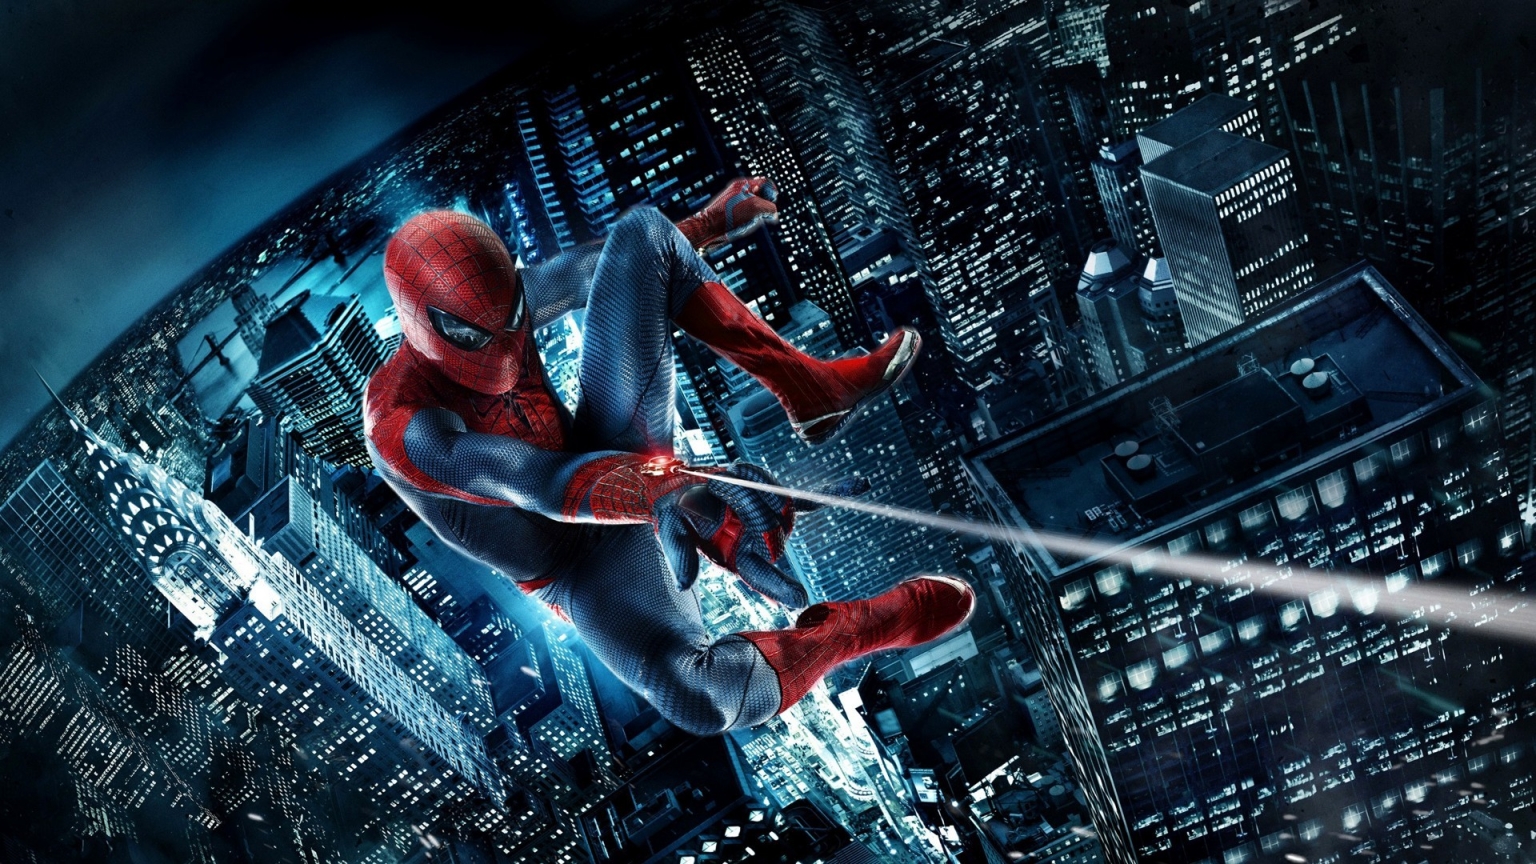 The Amazing SpiderMan 2 for 1536 x 864 HDTV resolution